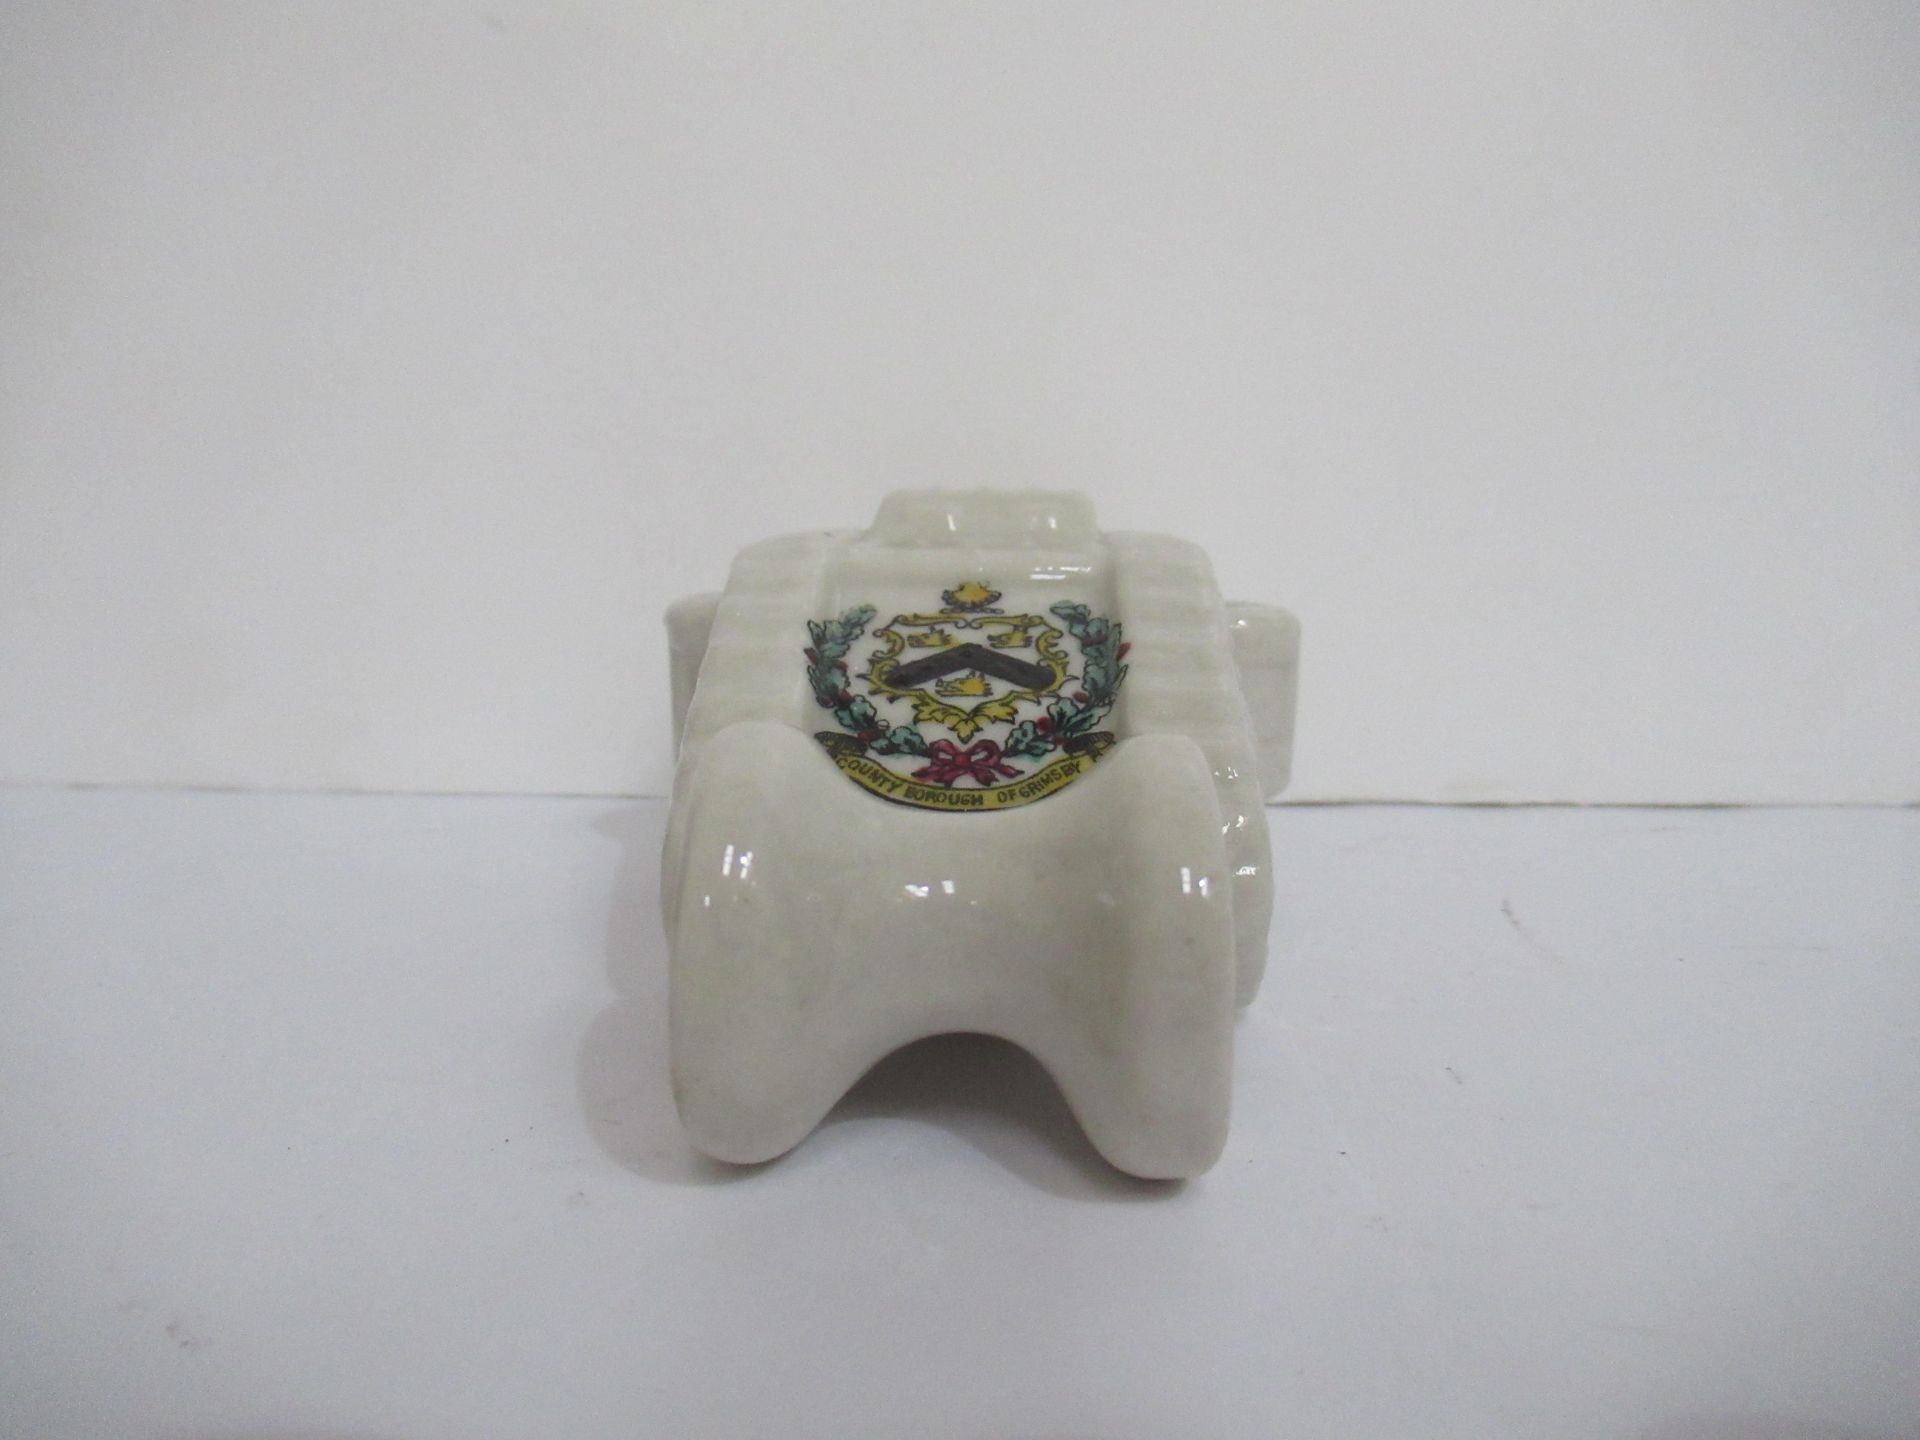 Crested China waterfall heraldic 'model of a British Tank' with Grimsby coat of arms (125mm x 75mm) - Image 2 of 10